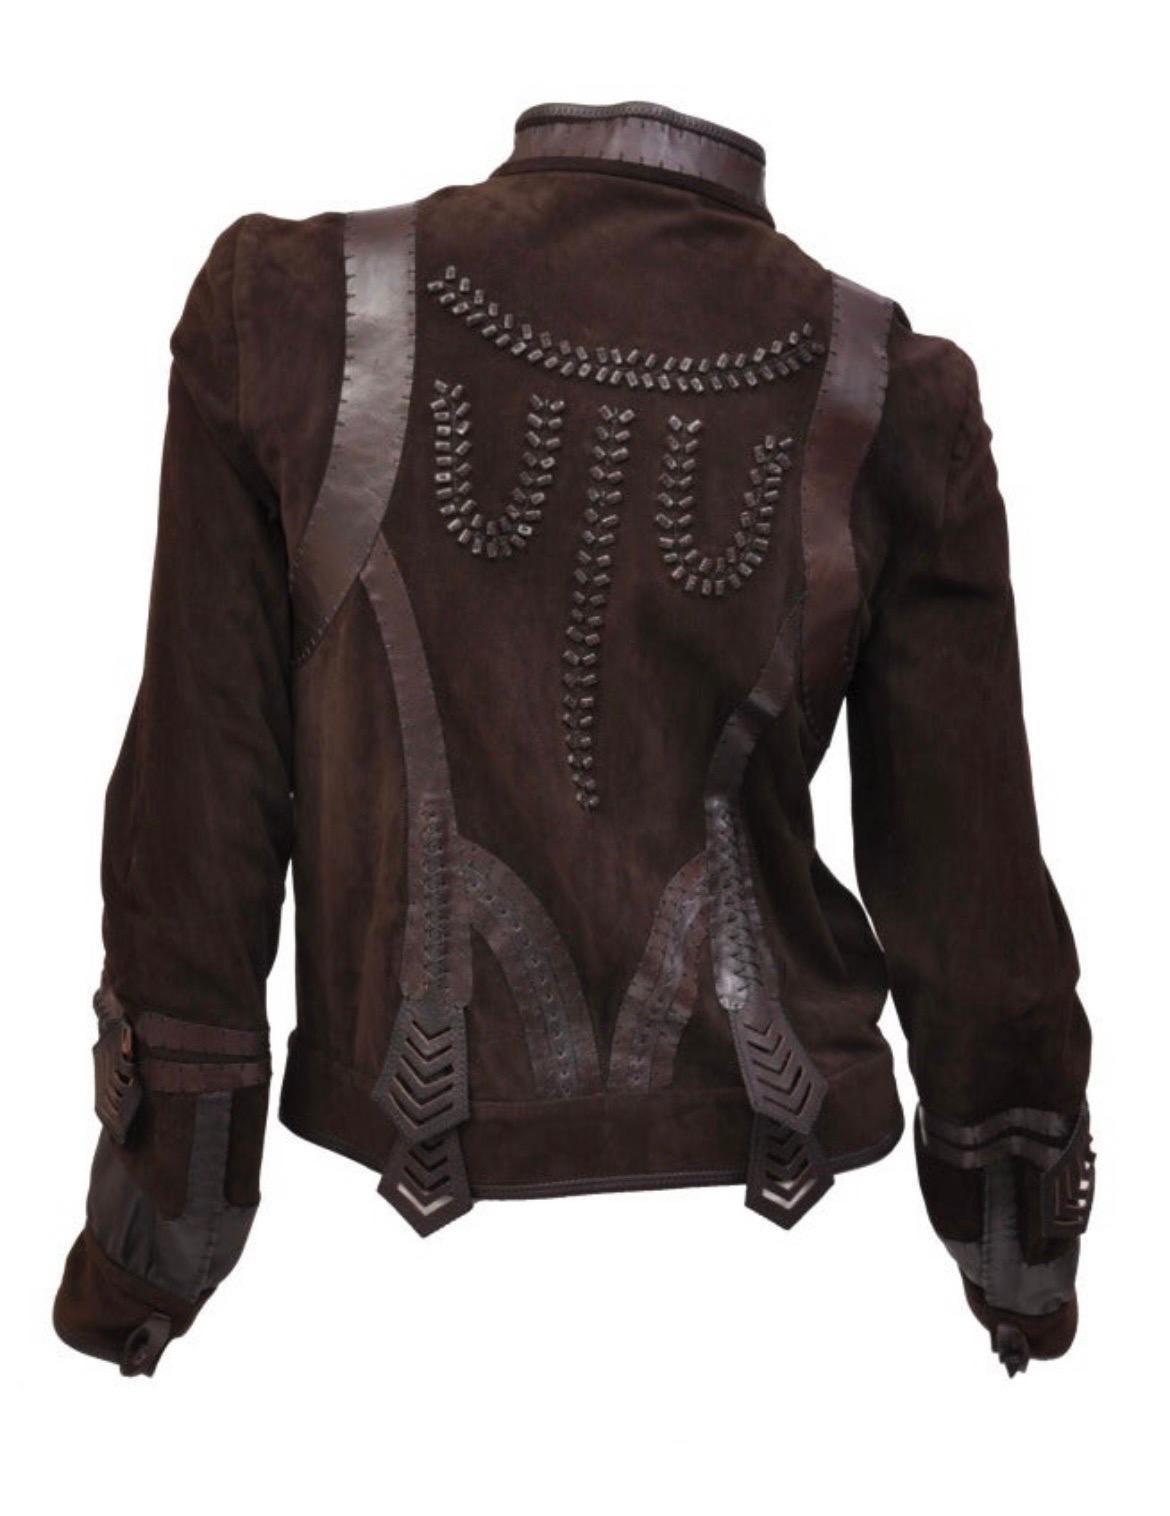 Vintage Fendi Embellished Brown Leather Jacket *New with tags* In New Condition For Sale In Montgomery, TX